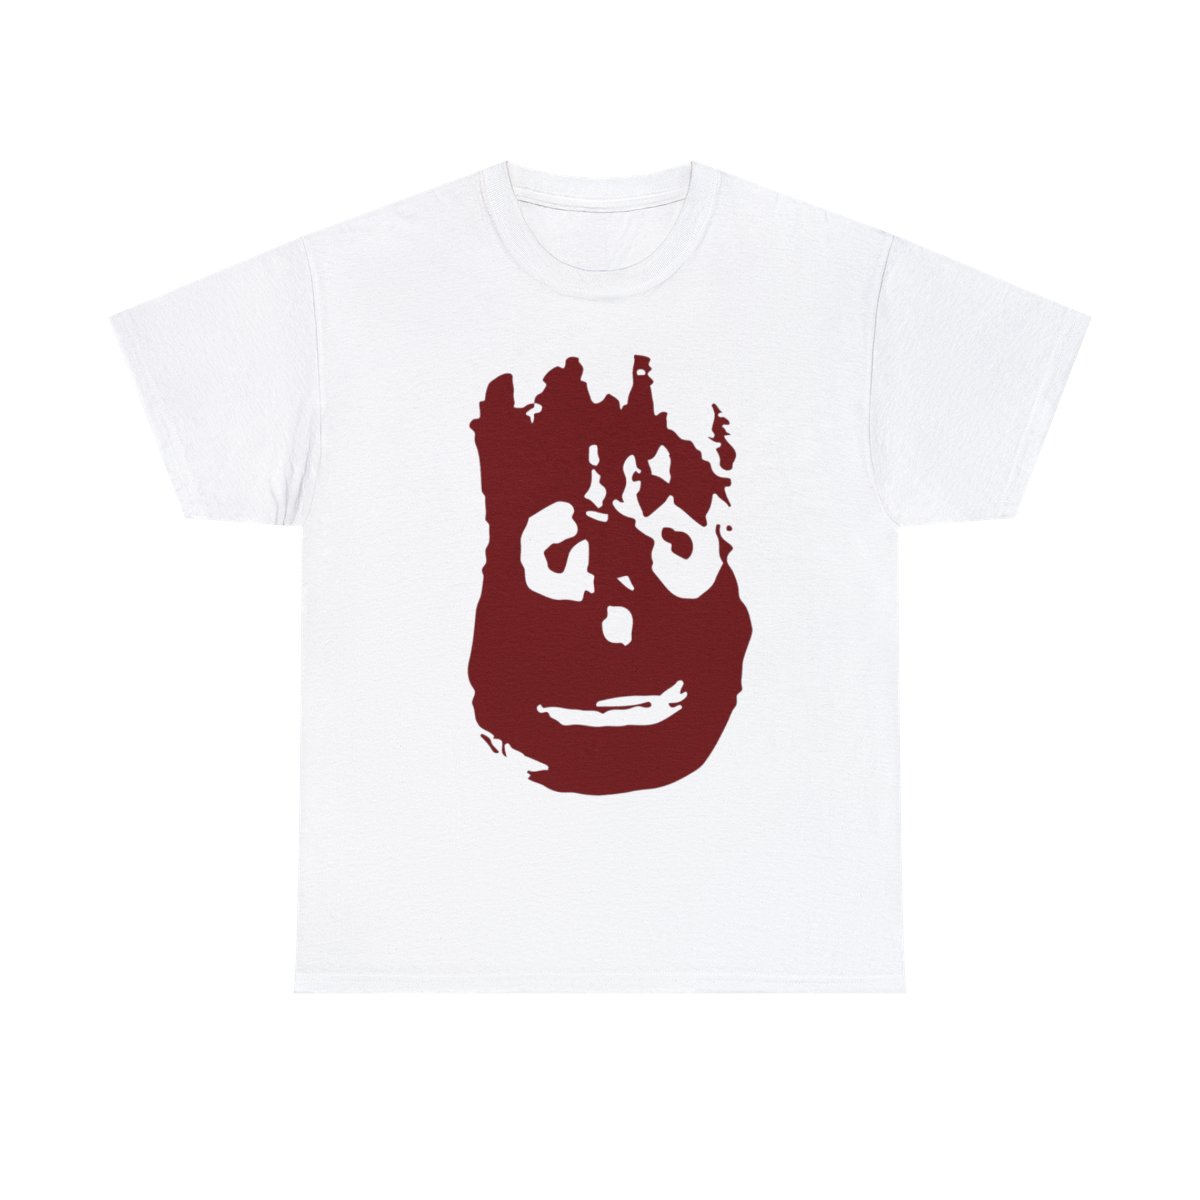 Wilson Inspired by Castaway Printed T-Shirt Unisex Heavy Cotton Tee